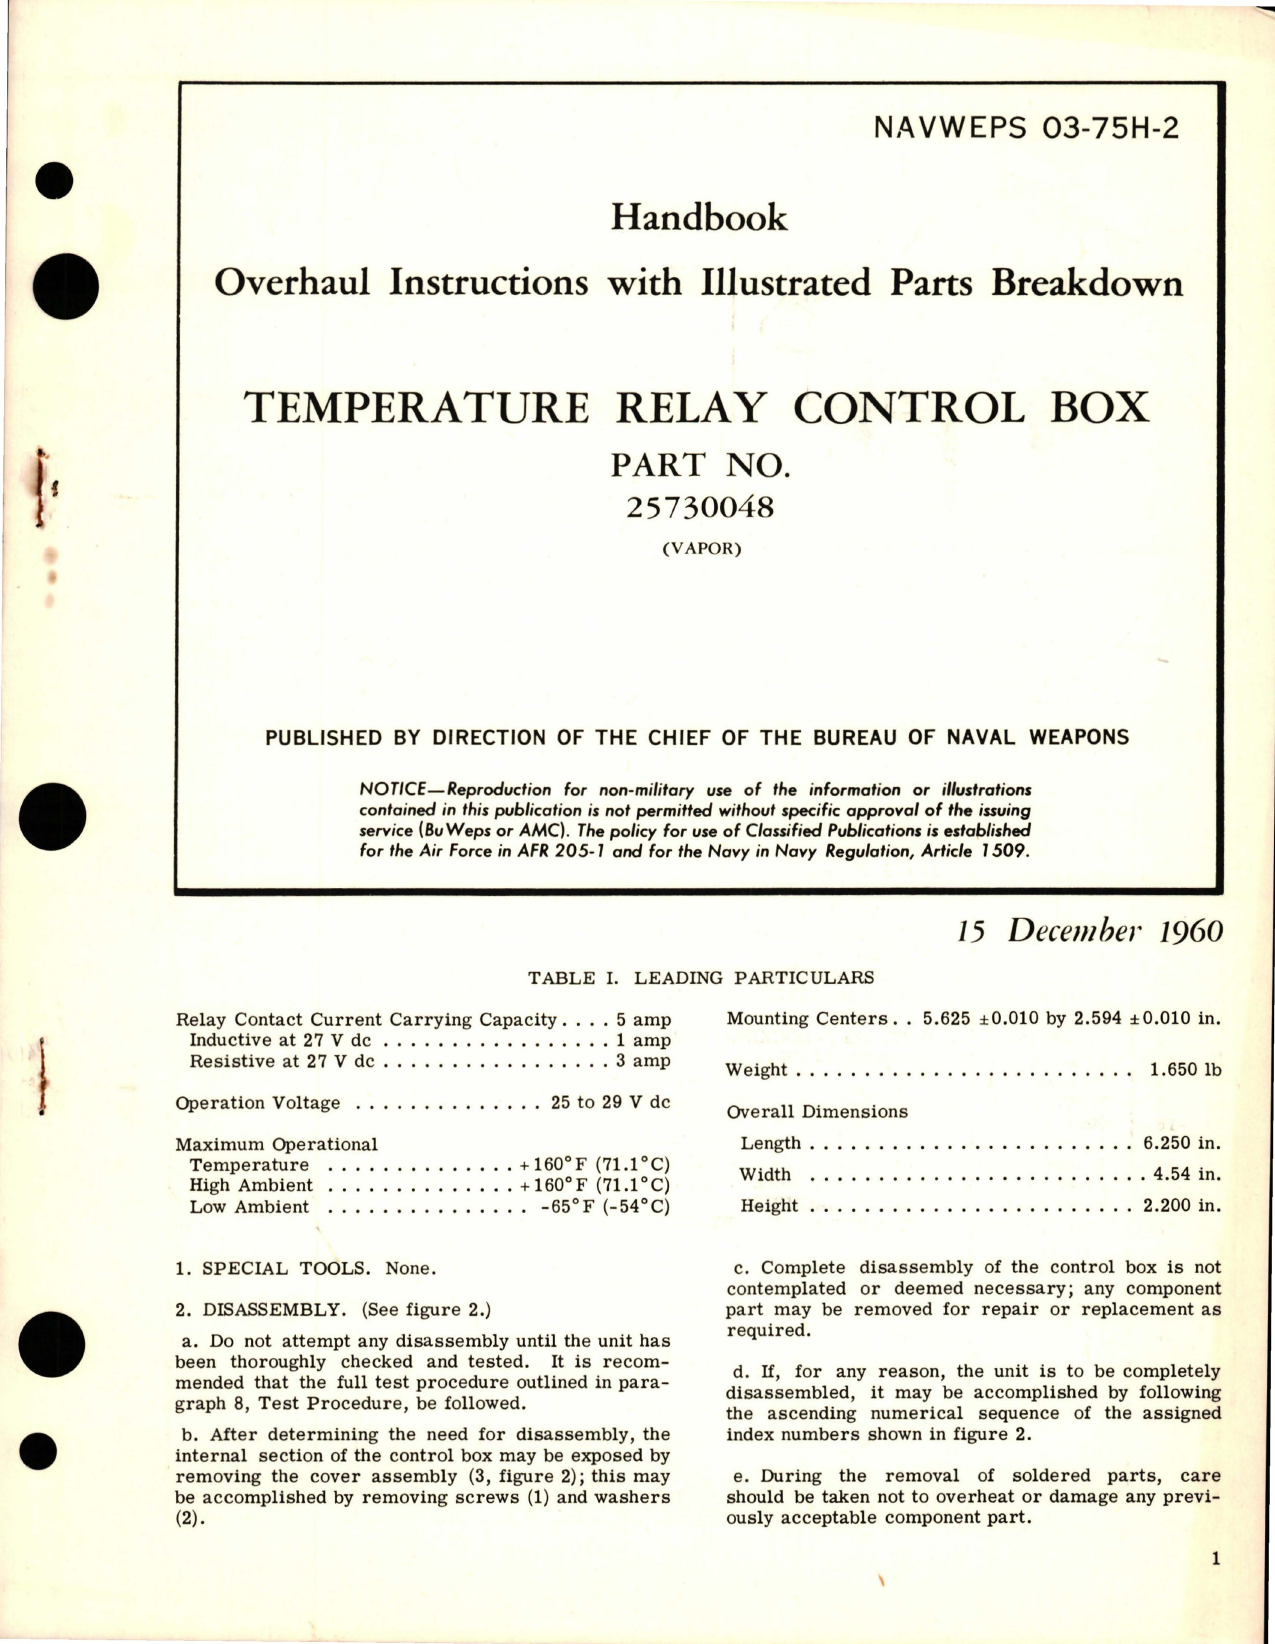 Sample page 1 from AirCorps Library document: Overhaul Instructions with Illustrated Parts Breakdown for Temperature Relay Control Box - Part 25730048 